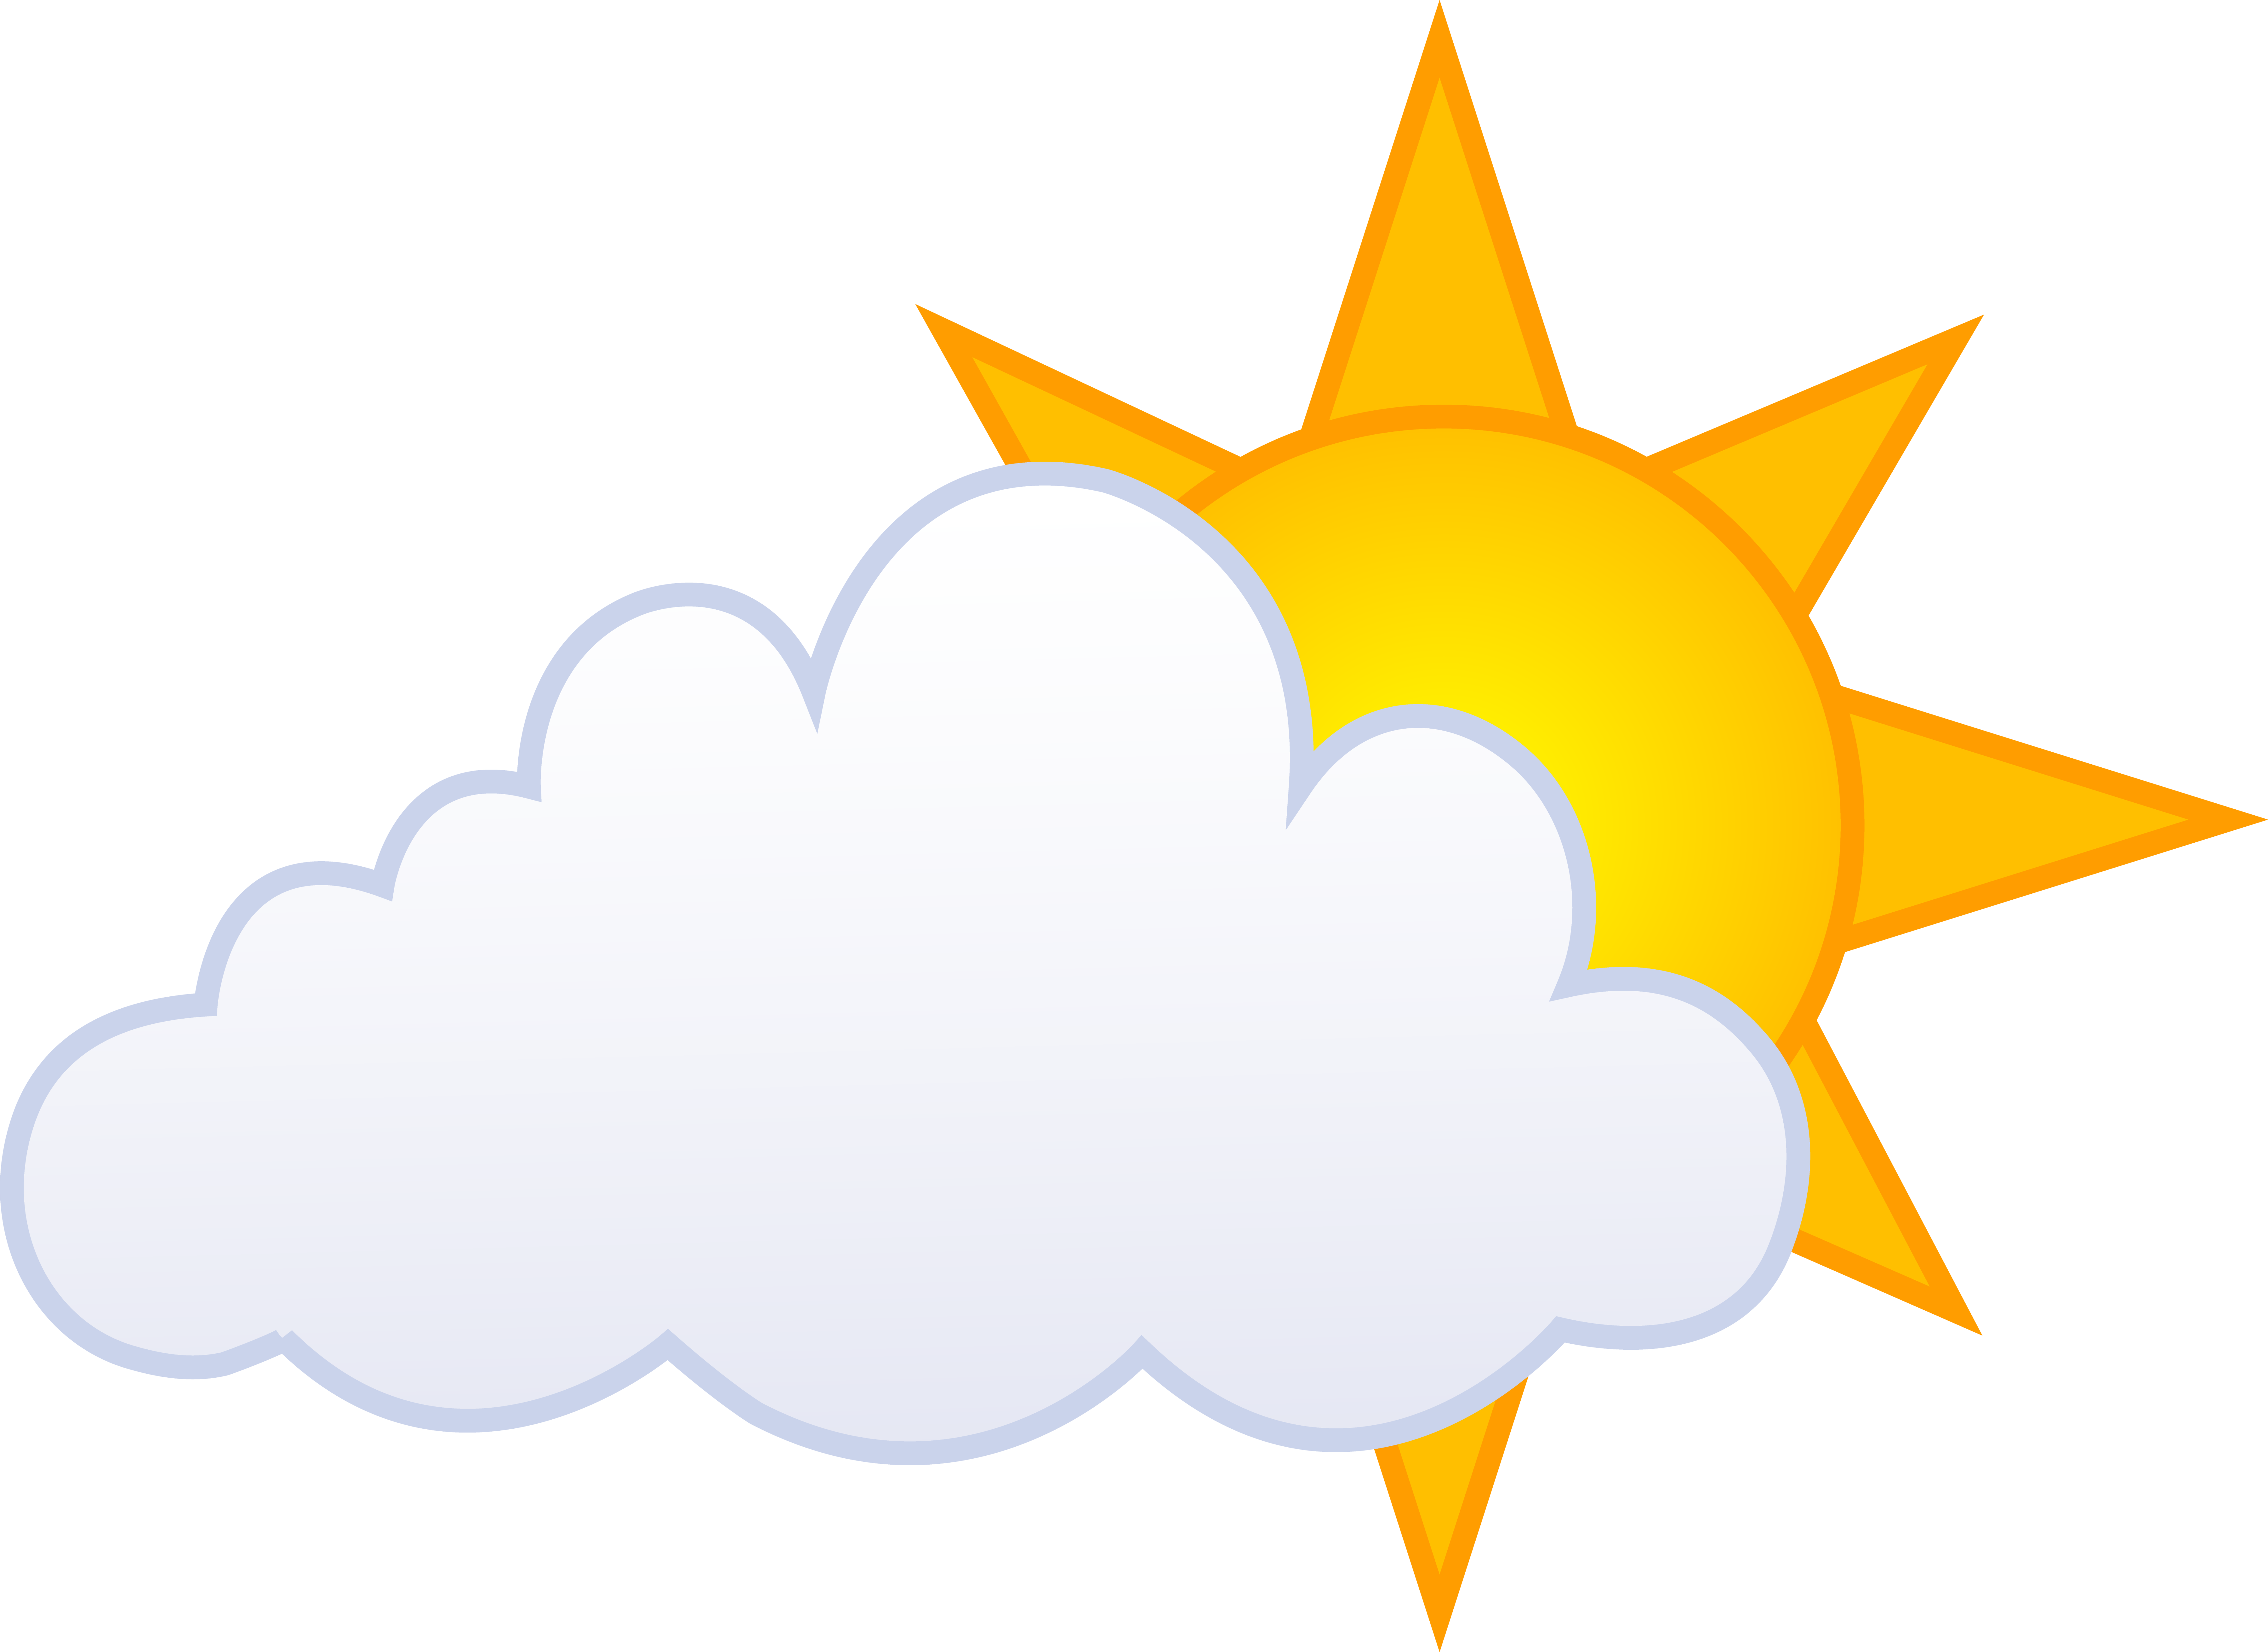 Partly cloudy weather clip art clipart free to use clip art ...